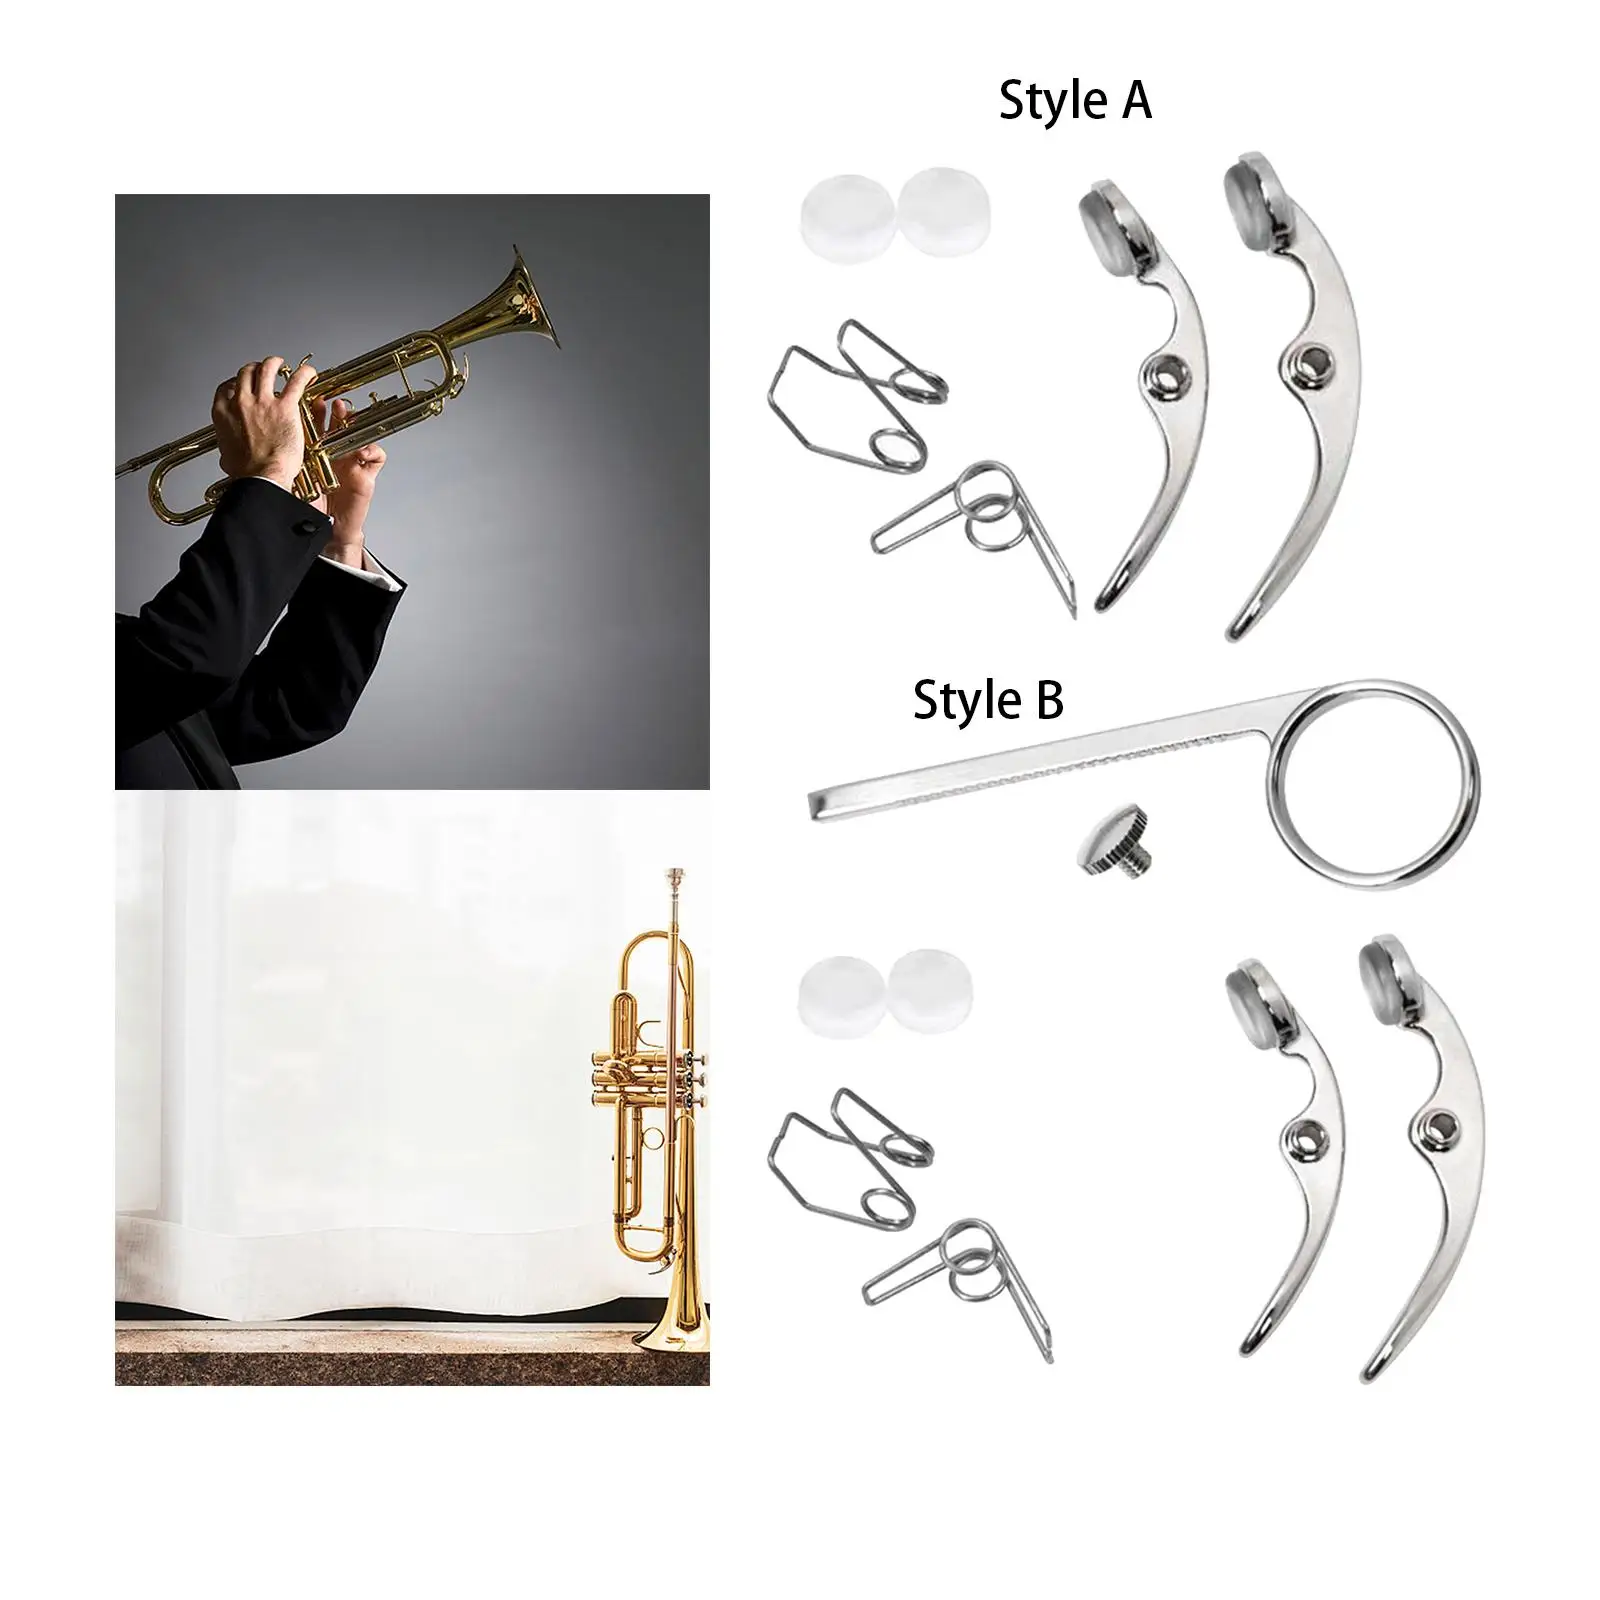 Portable Trumpet Water Value Water Value Holders Water Value Valve Trumpet Accessory with Springs Screws for Repairing Trumpet